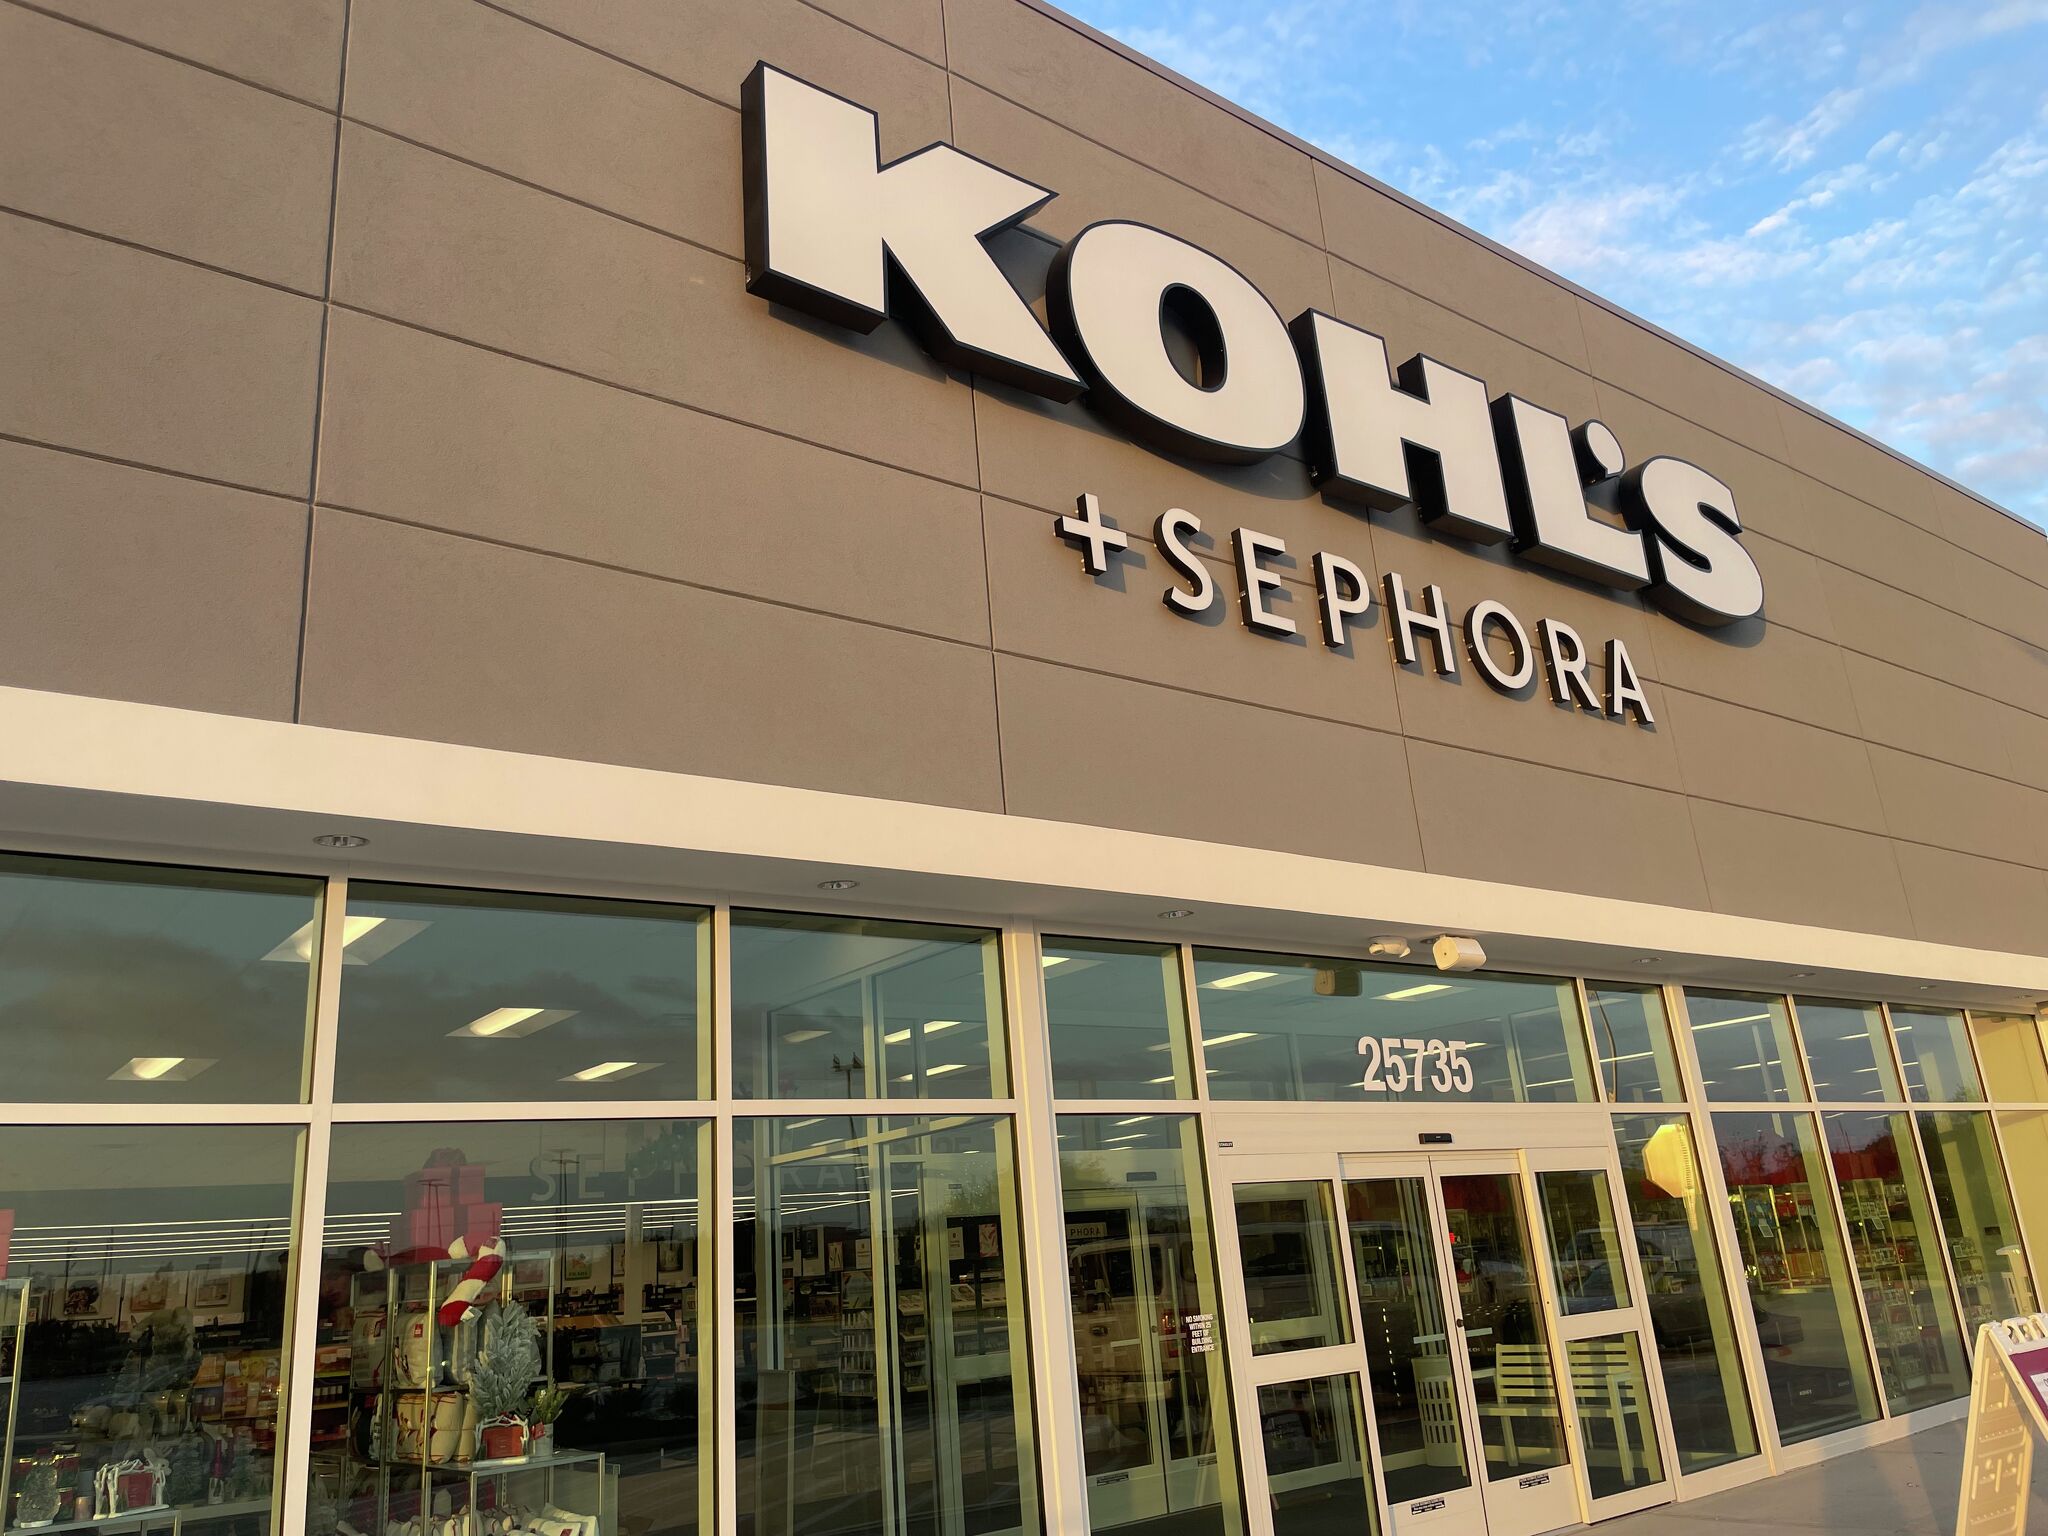 New Kohl's to open in Katy this November with in-store Sephora